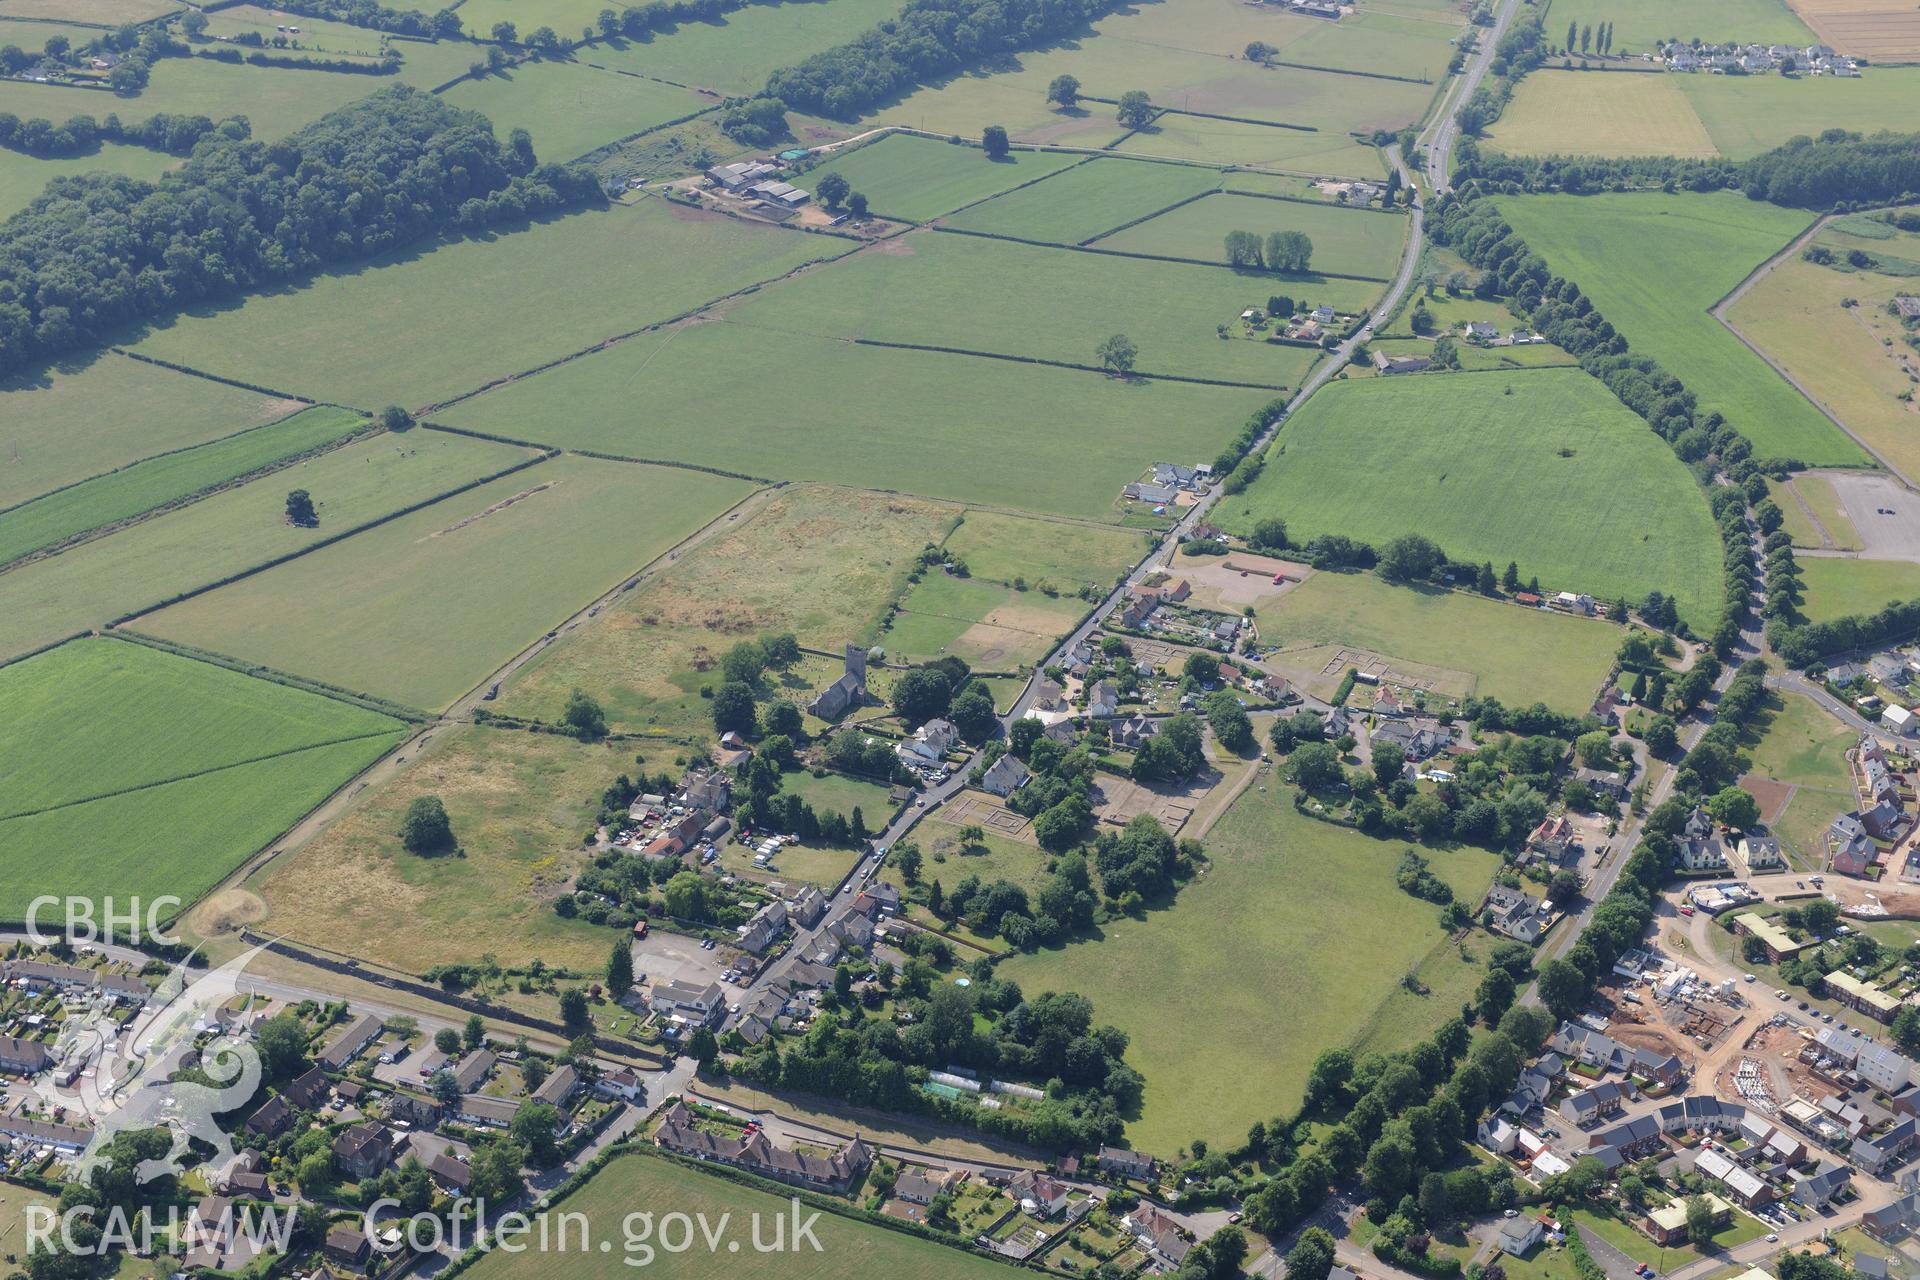 St. Stephen's church, Roman Amphitheatre and Venta Silurum (Caerwent Roman City), Caerwent, near Chepstow. Oblique aerial photograph taken during the Royal Commission?s programme of archaeological aerial reconnaissance by Toby Driver on 1st August 2013.